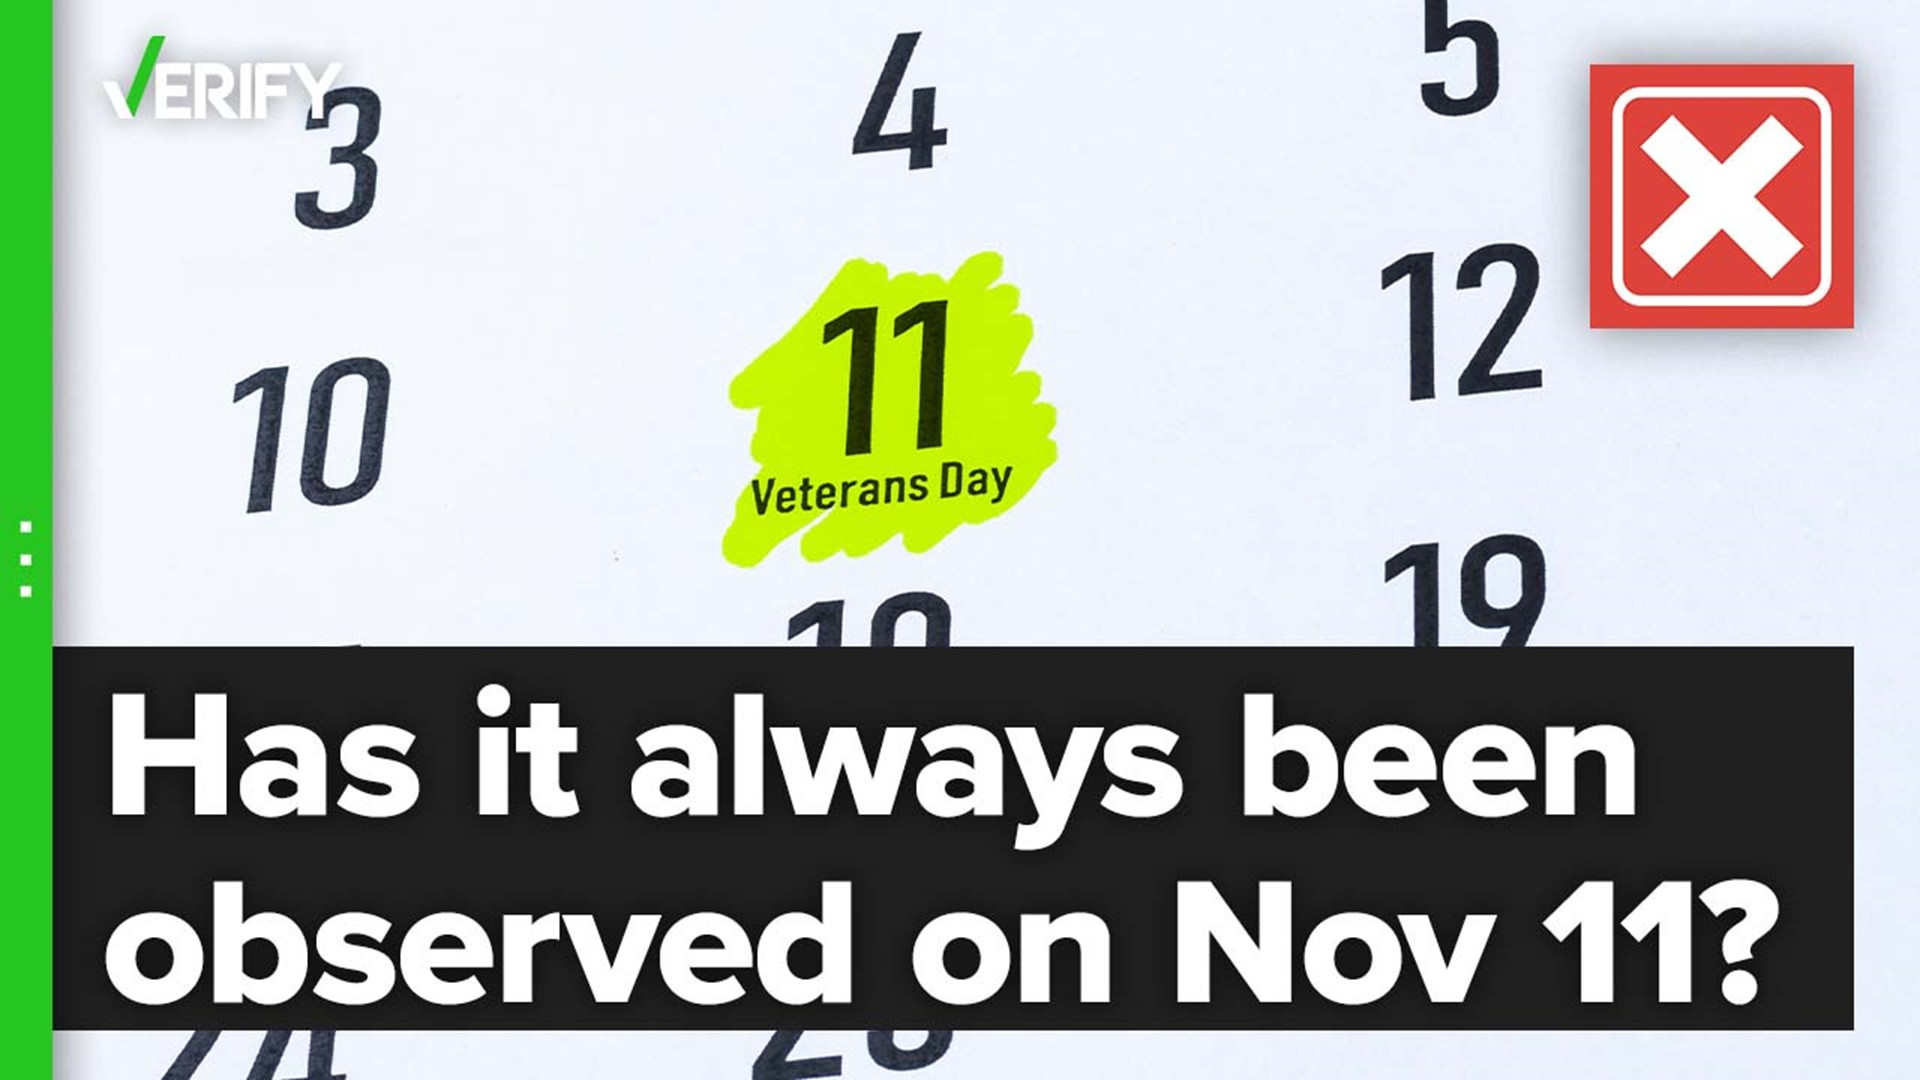 Veterans Day started on Nov. 11, 1938, as Armistice Day to honor veterans of WWI